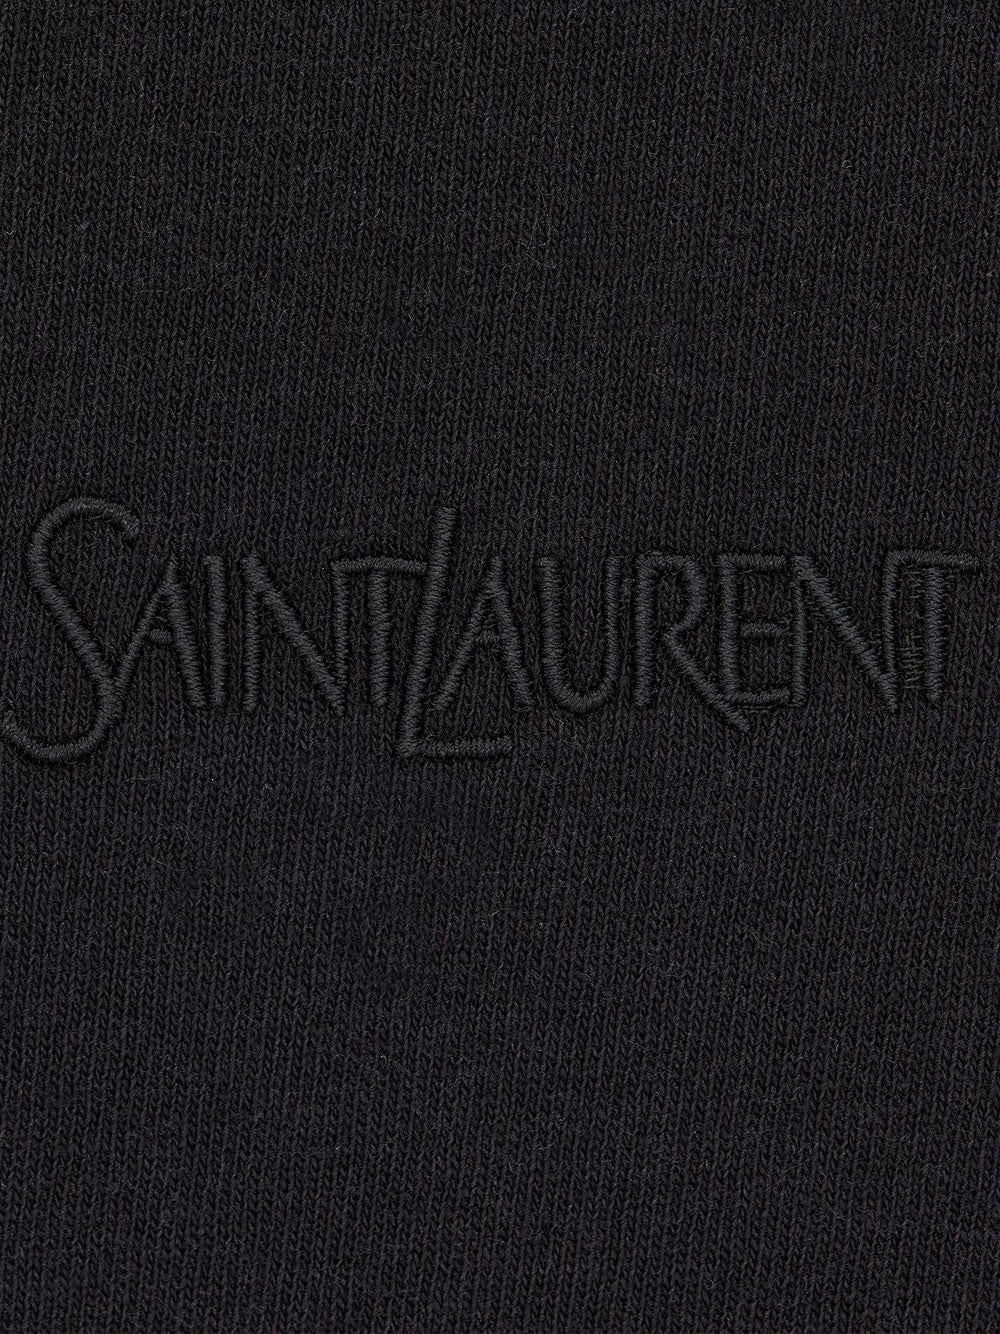 Embroidered-logo t-shirt